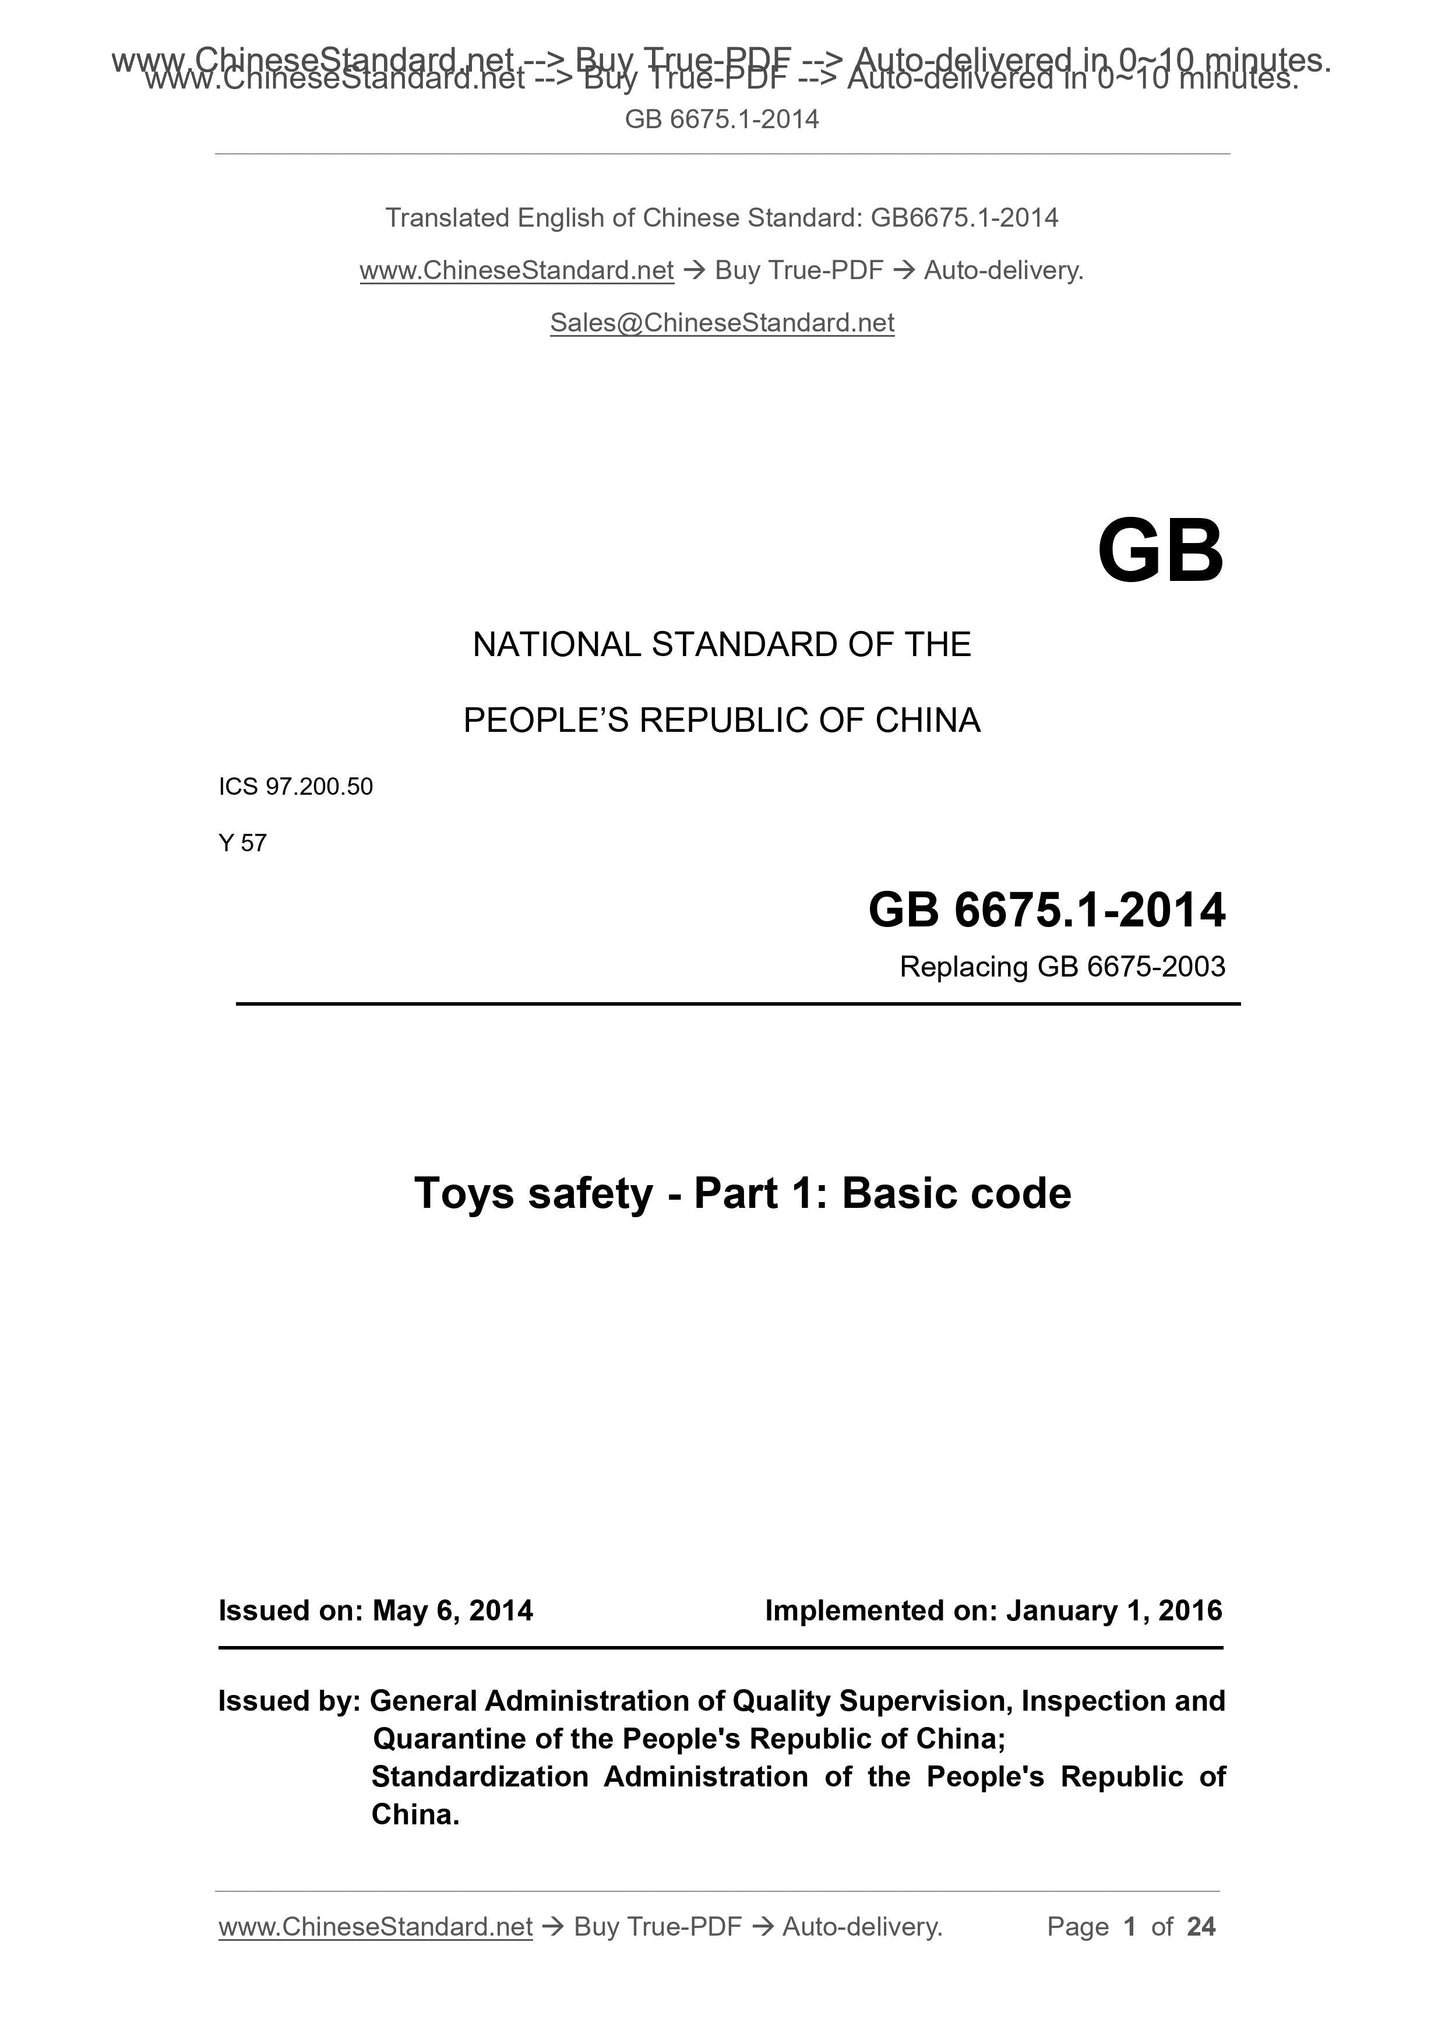 GB 6675.1-2014 Page 1